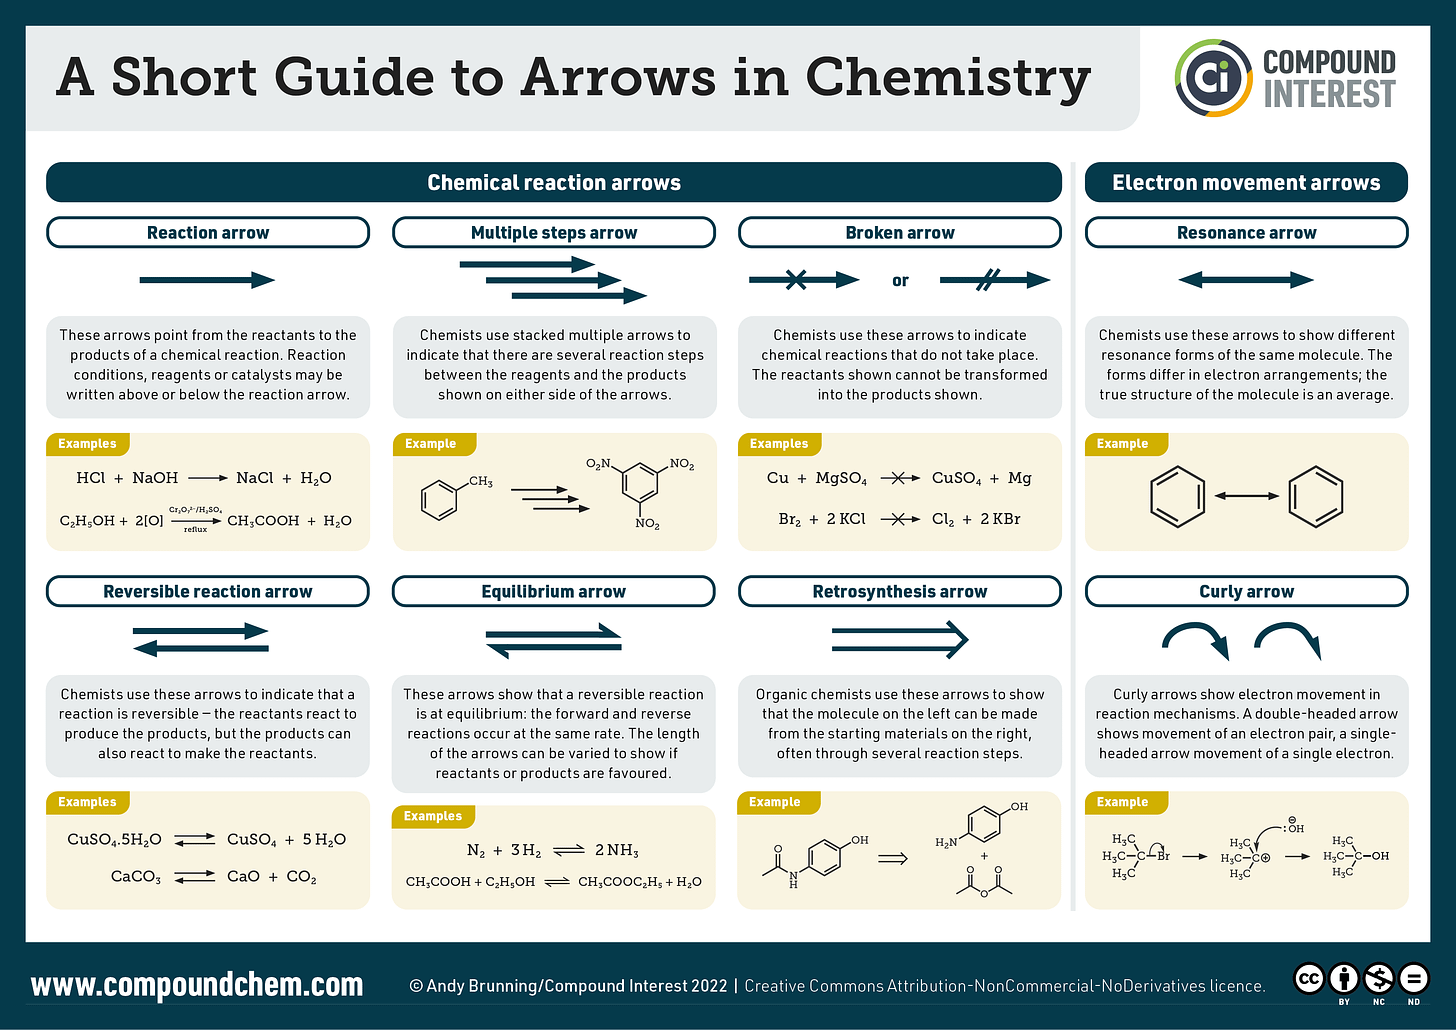 Infographic highlighting different types of arrows used in chemistry. The graphic is broken into two sections: chemical reaction arrows and electron movement arrows. Chemical reaction arrows shown are the reaction arrow, the multiple steps arrow, the broken arrow, the reversible reaction arrow, the equilibrium arrow and the retrosynthesis arrow. Electron movement arrows shown are the resonance arrows and curly arrows.